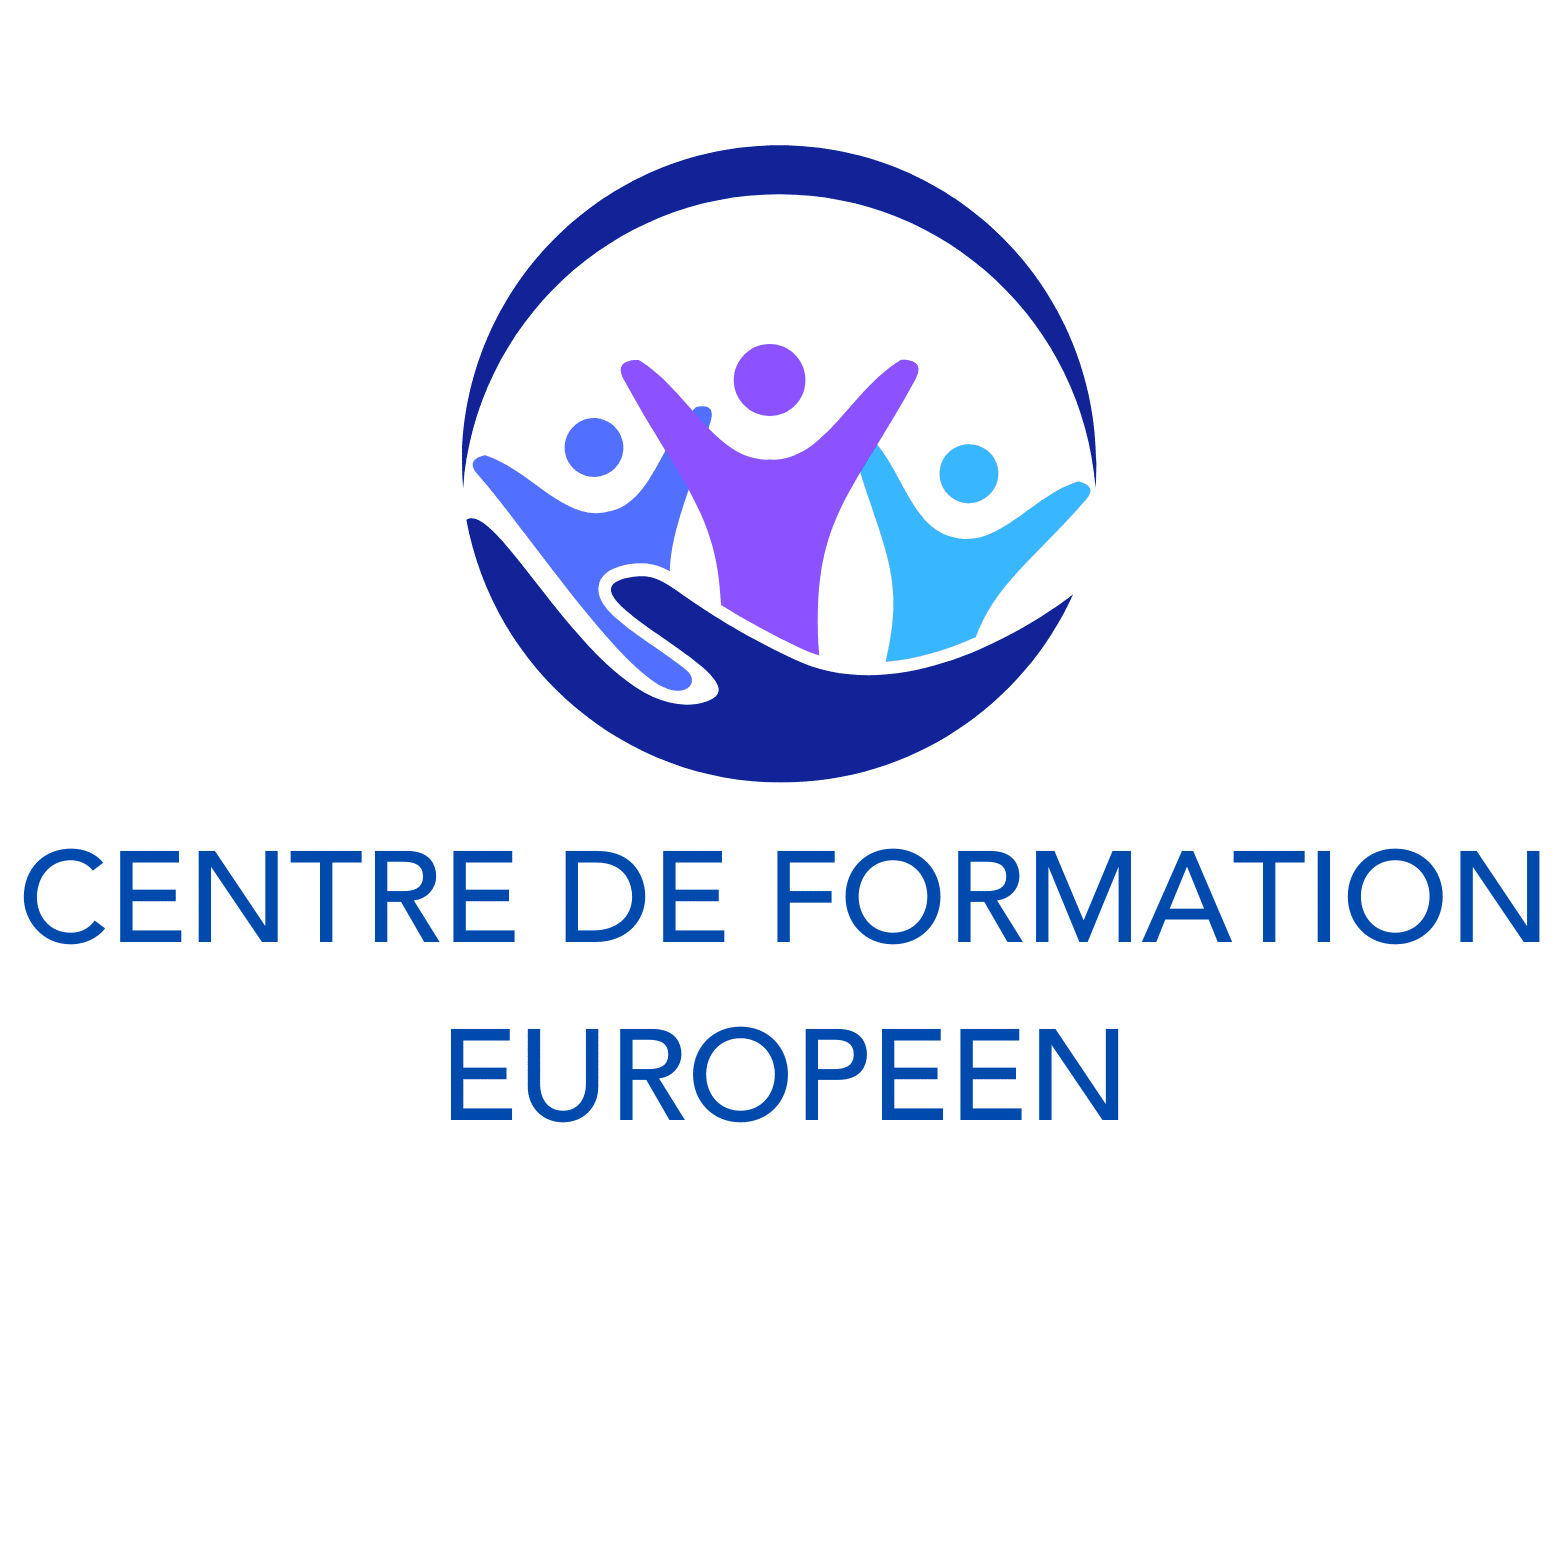 Centre de Formation europeen,CFE,formation cpf,centre de formation en ligne,formation cpf gratuit, formation pole emploi,